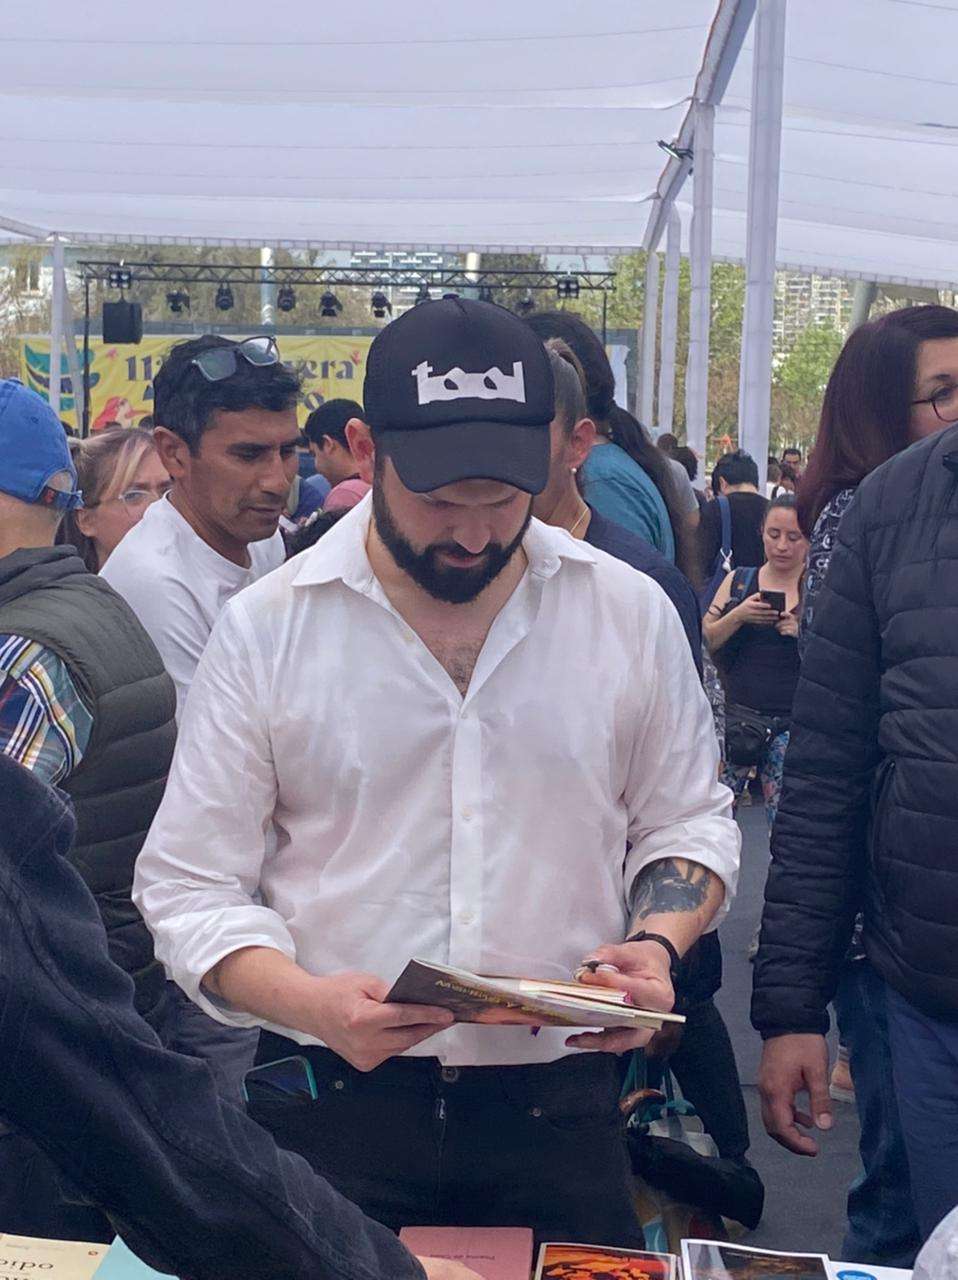 image showing The president of Chile attending a book fair today.